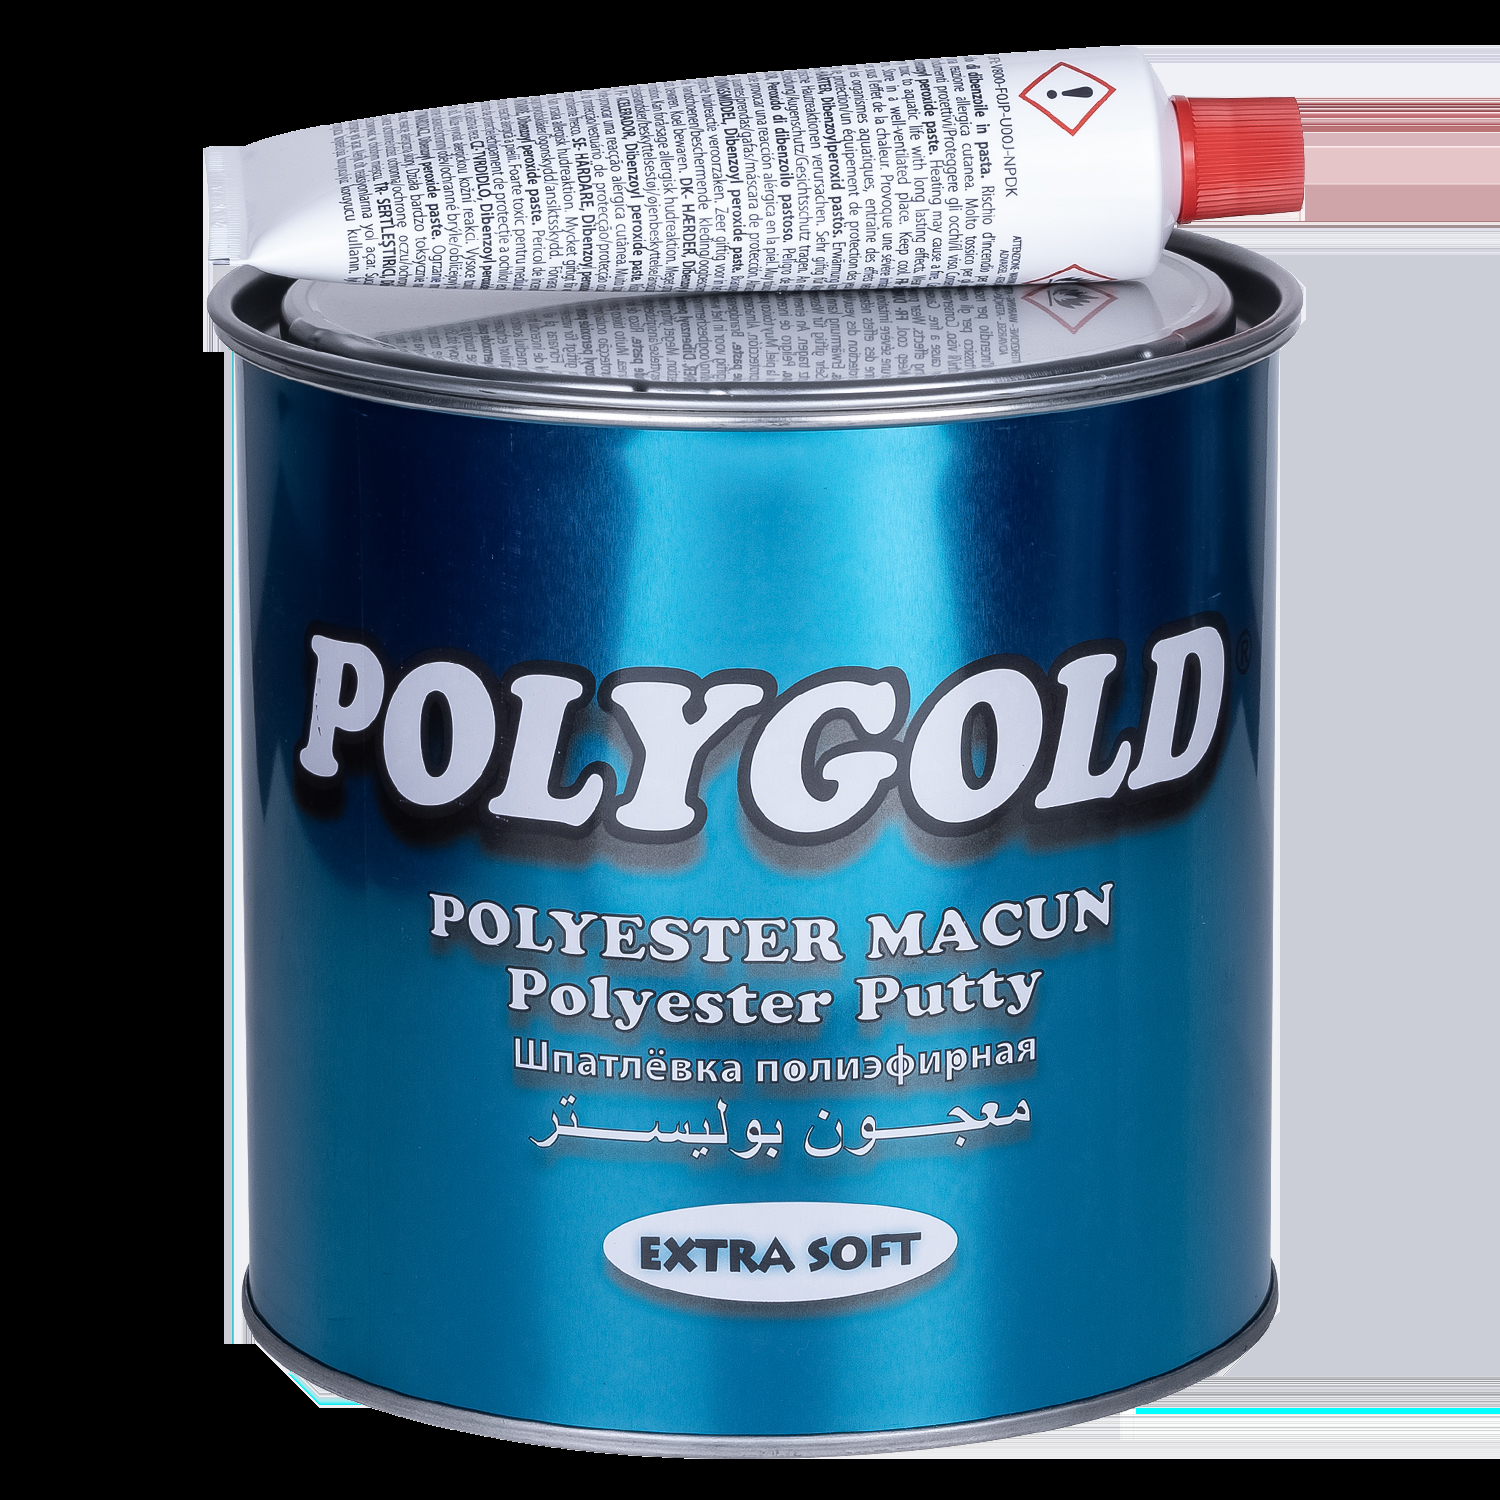 Polygold Polyester Extra Soft Macun